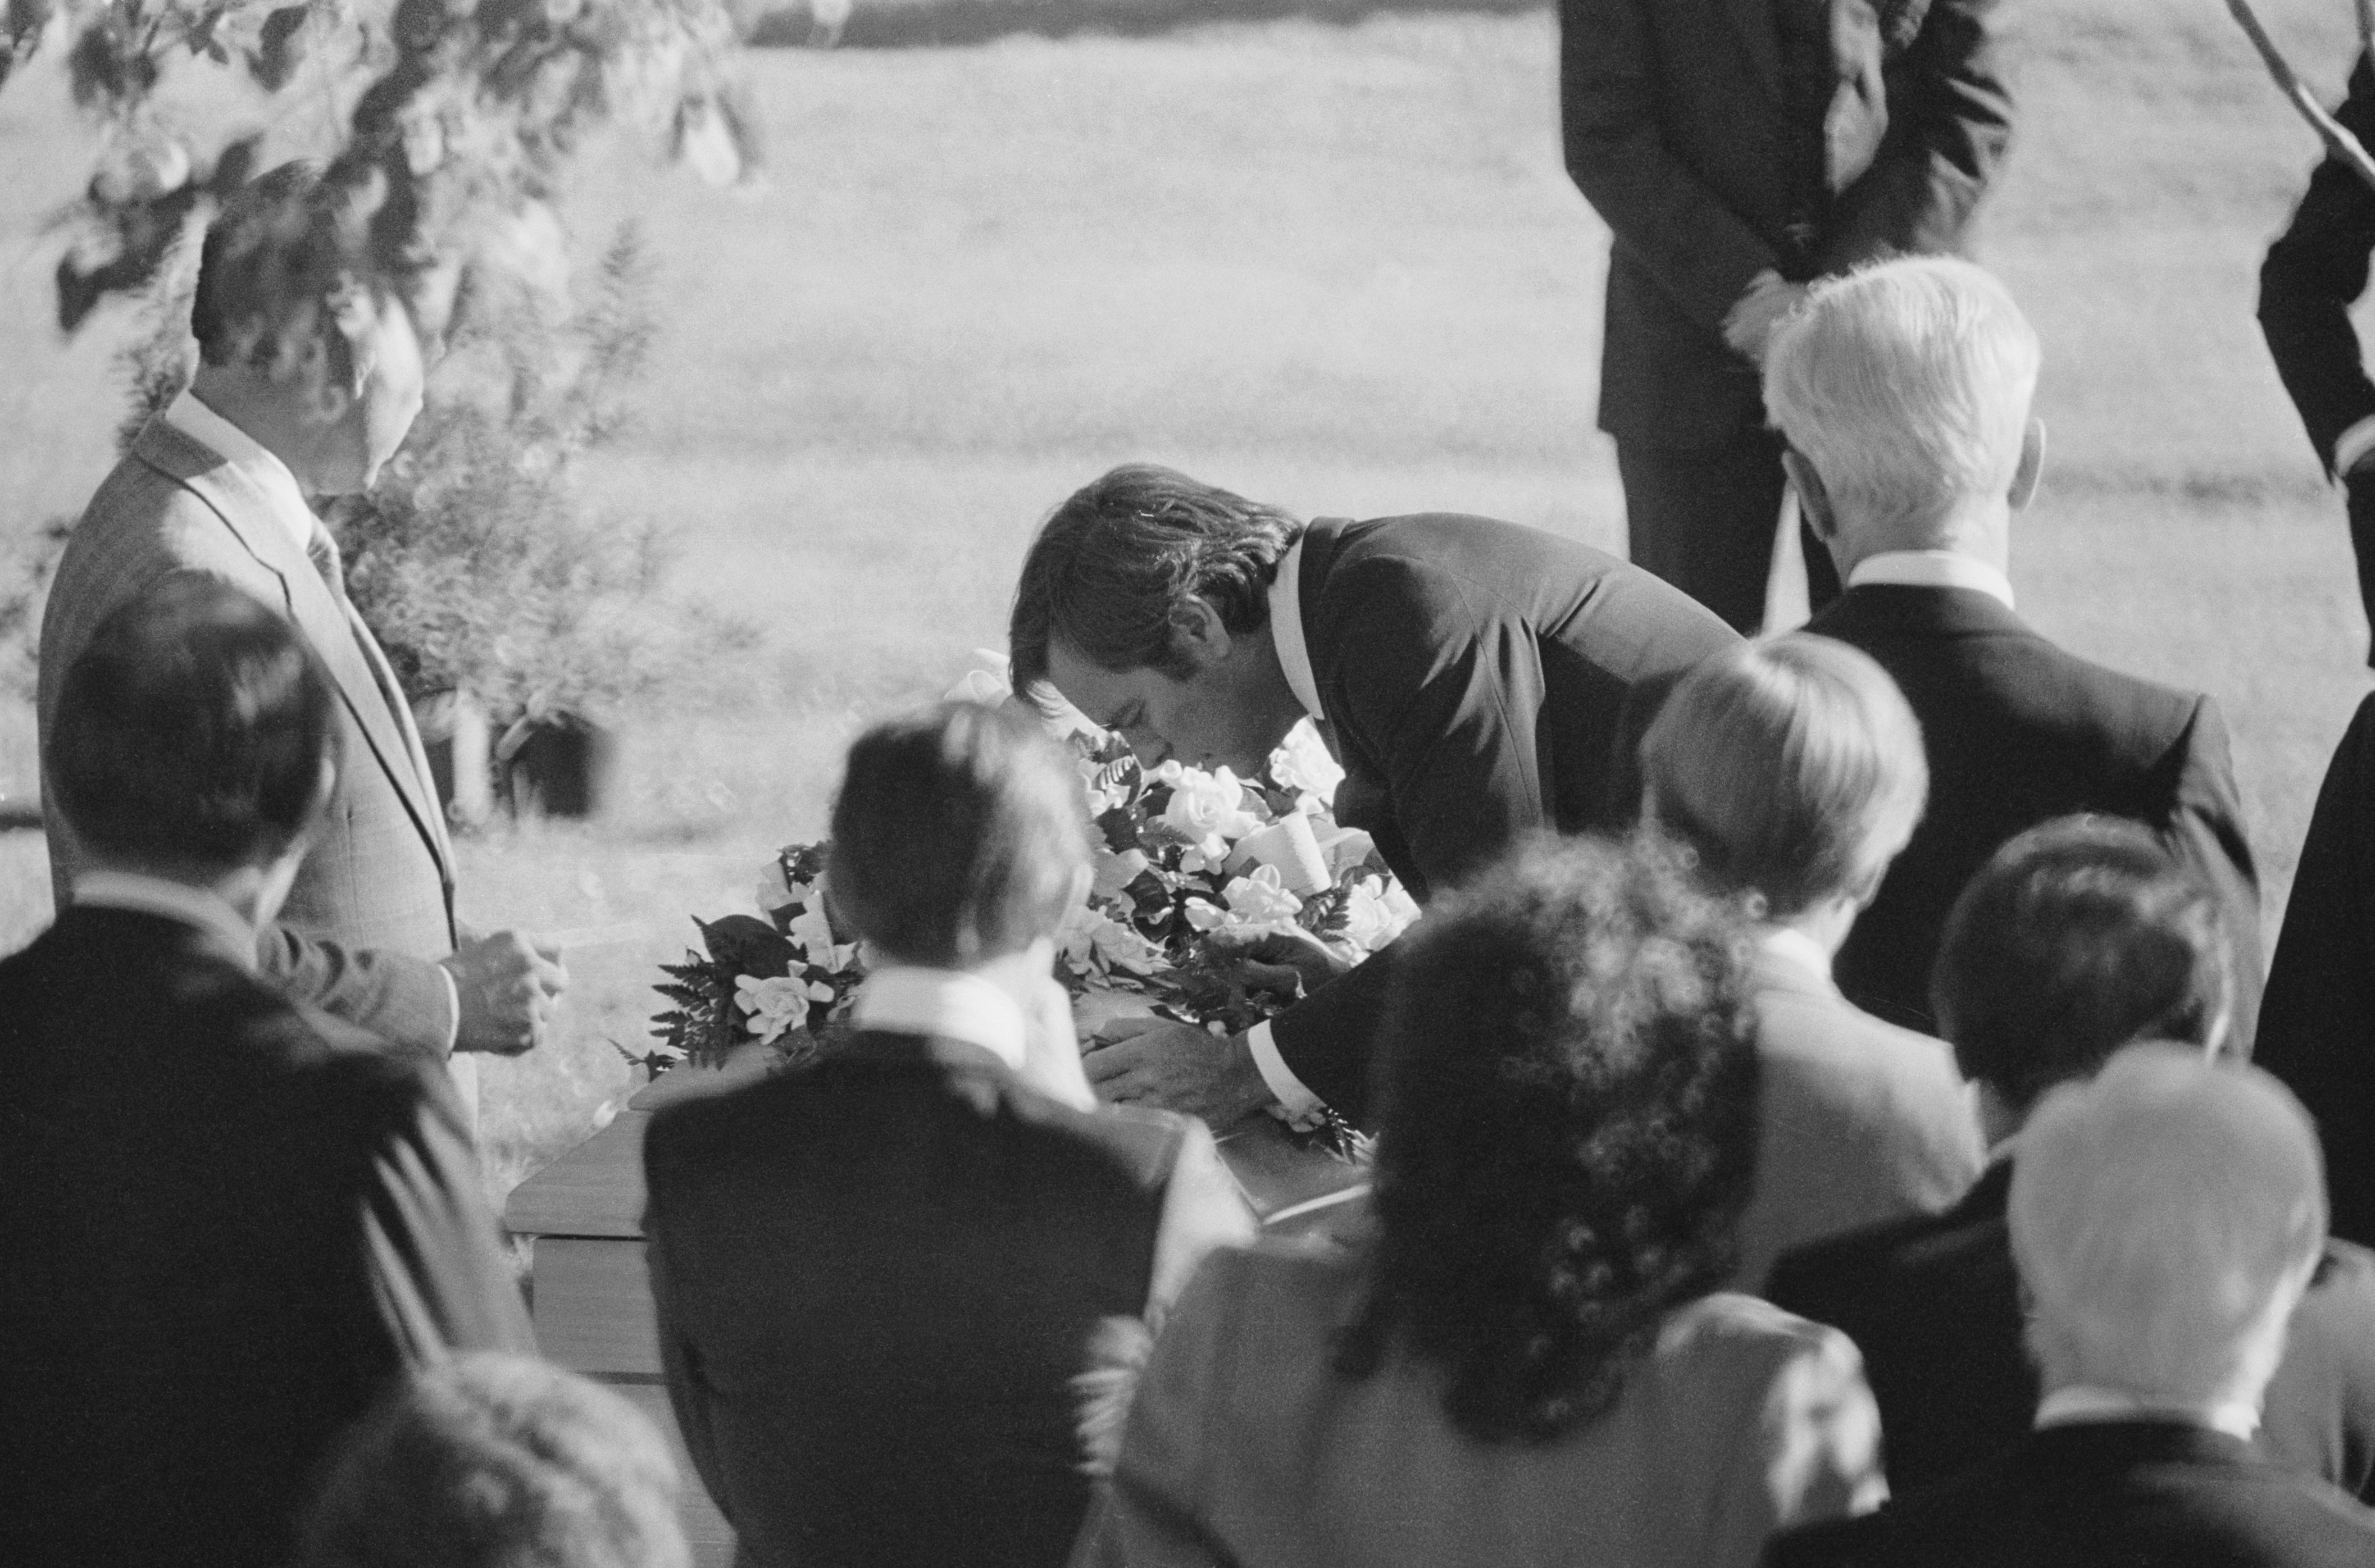 Robert Wagner at Natalie Wood's funeral in california in 1981 | Source: Getty Images